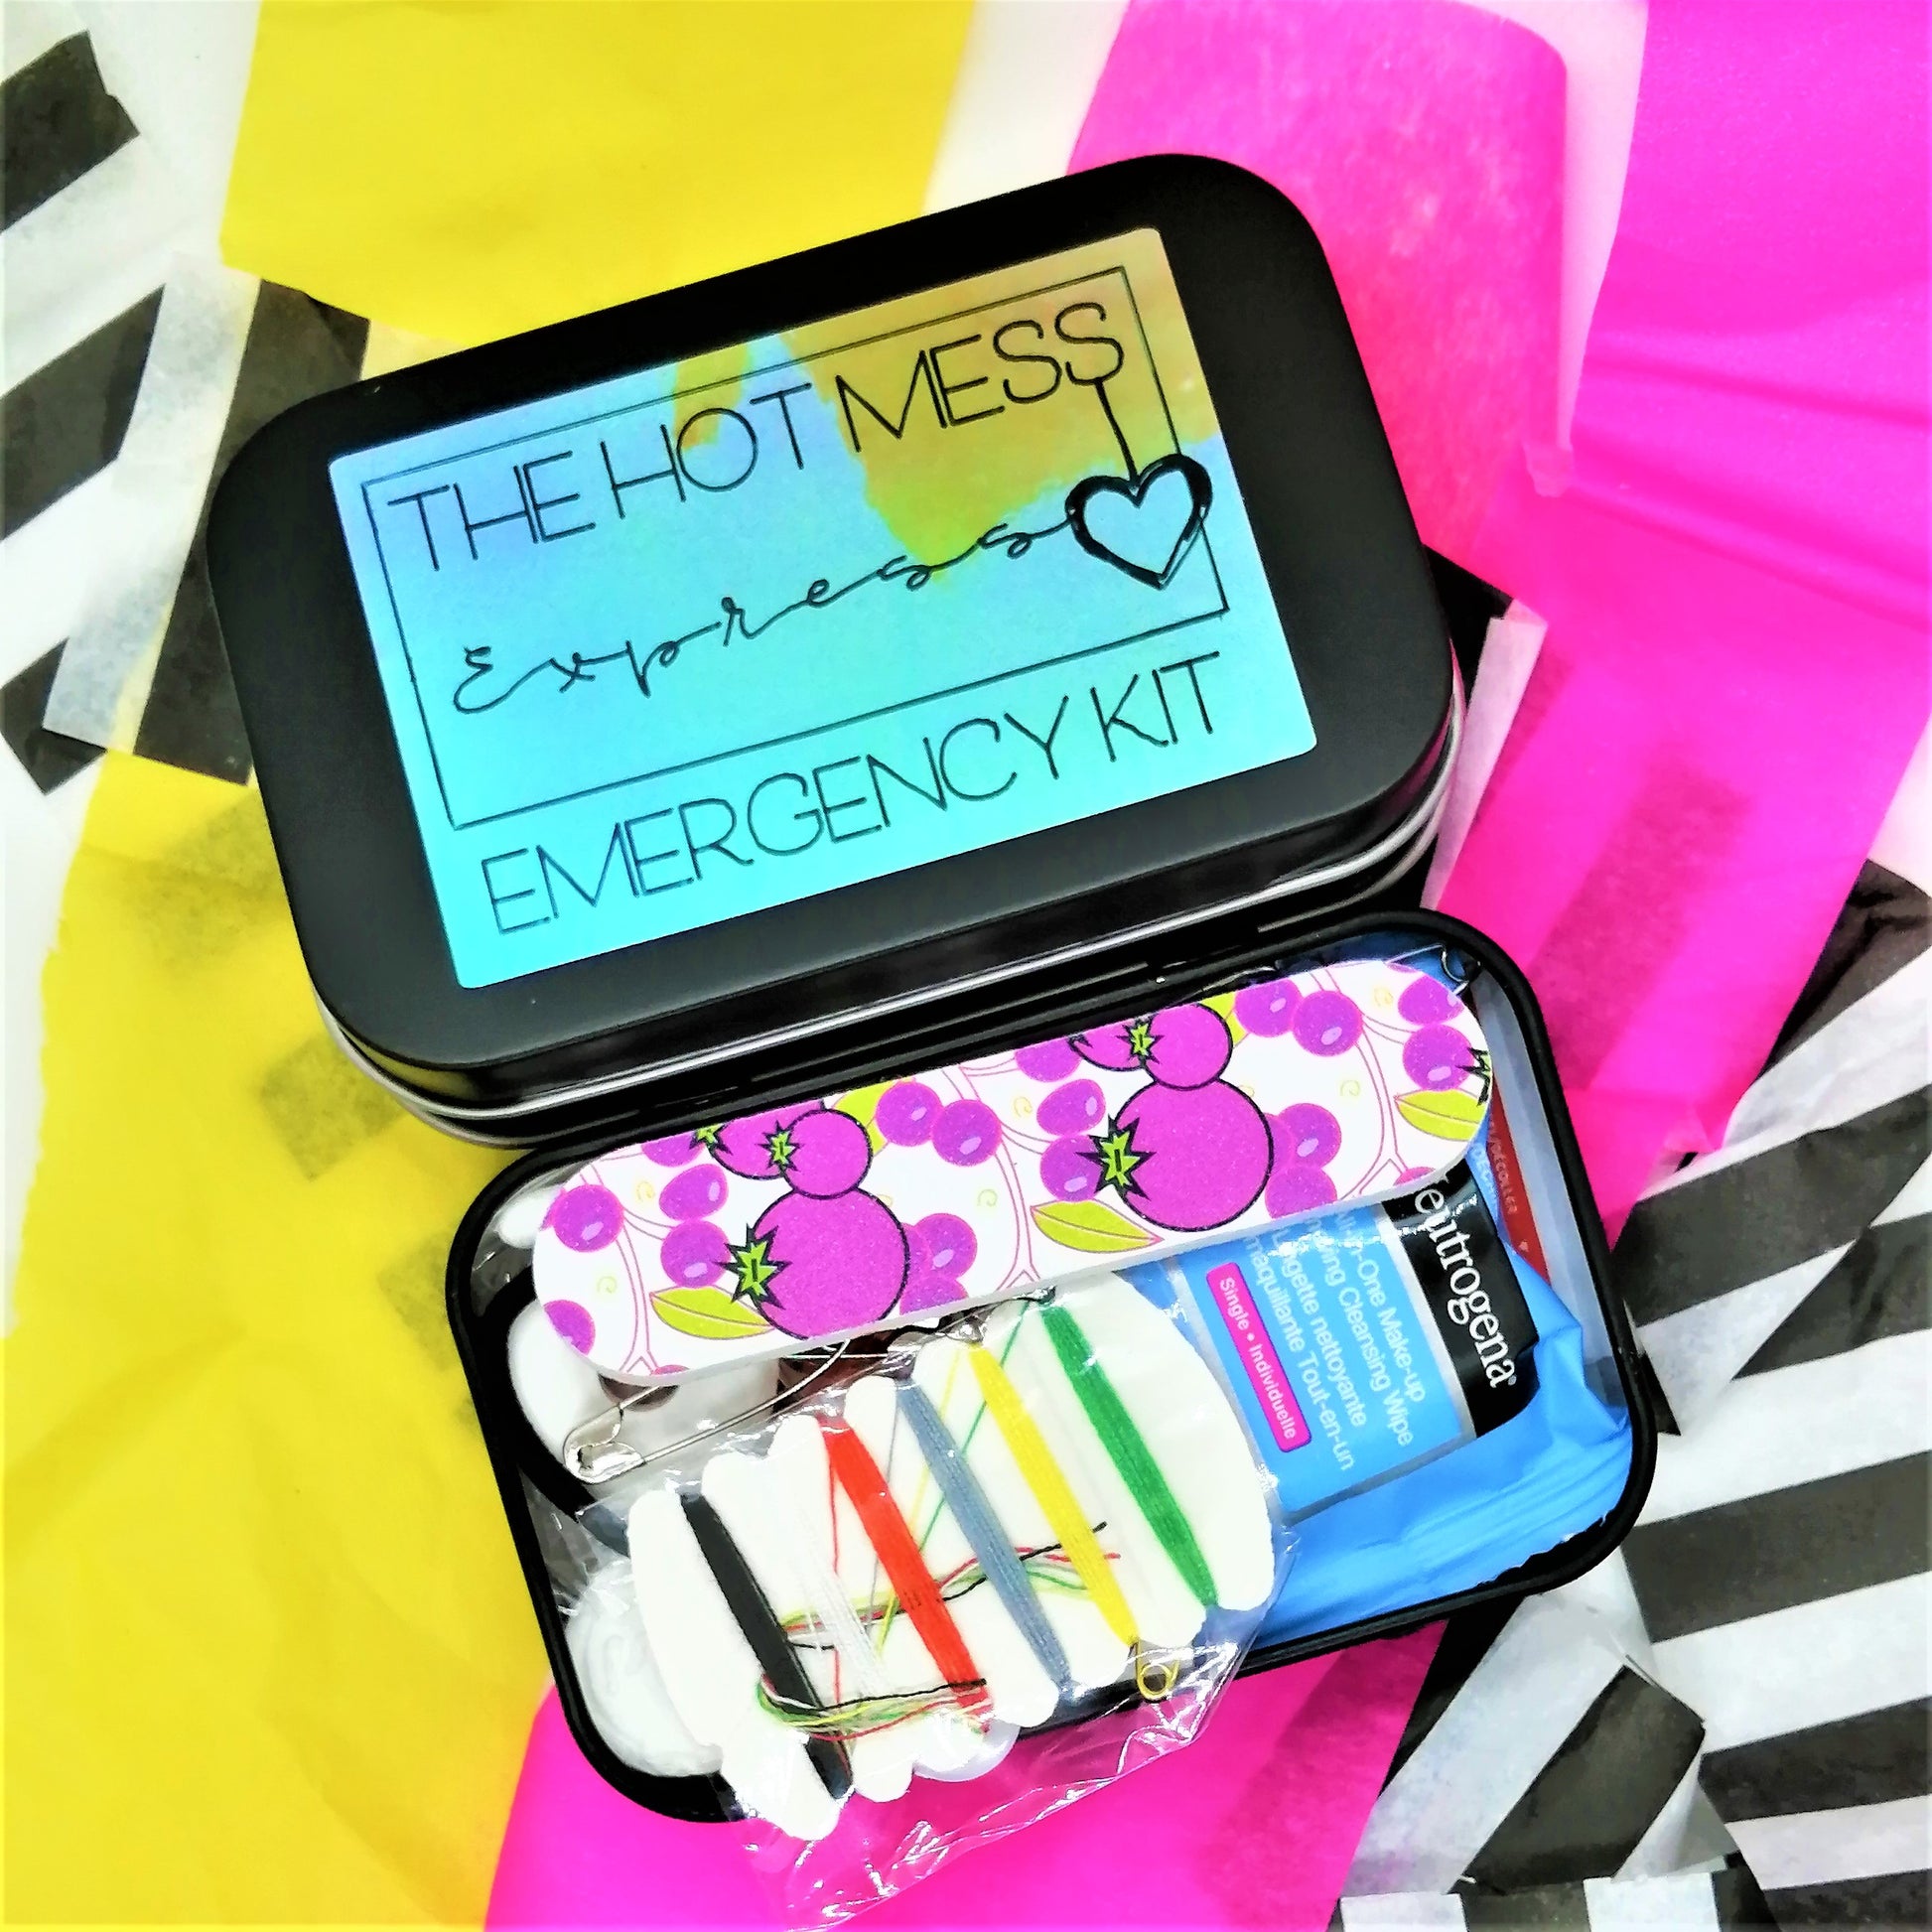 Buy online high quality The Hot Mess Express - Emergency Kit - The Movement Boutique - Kelowna